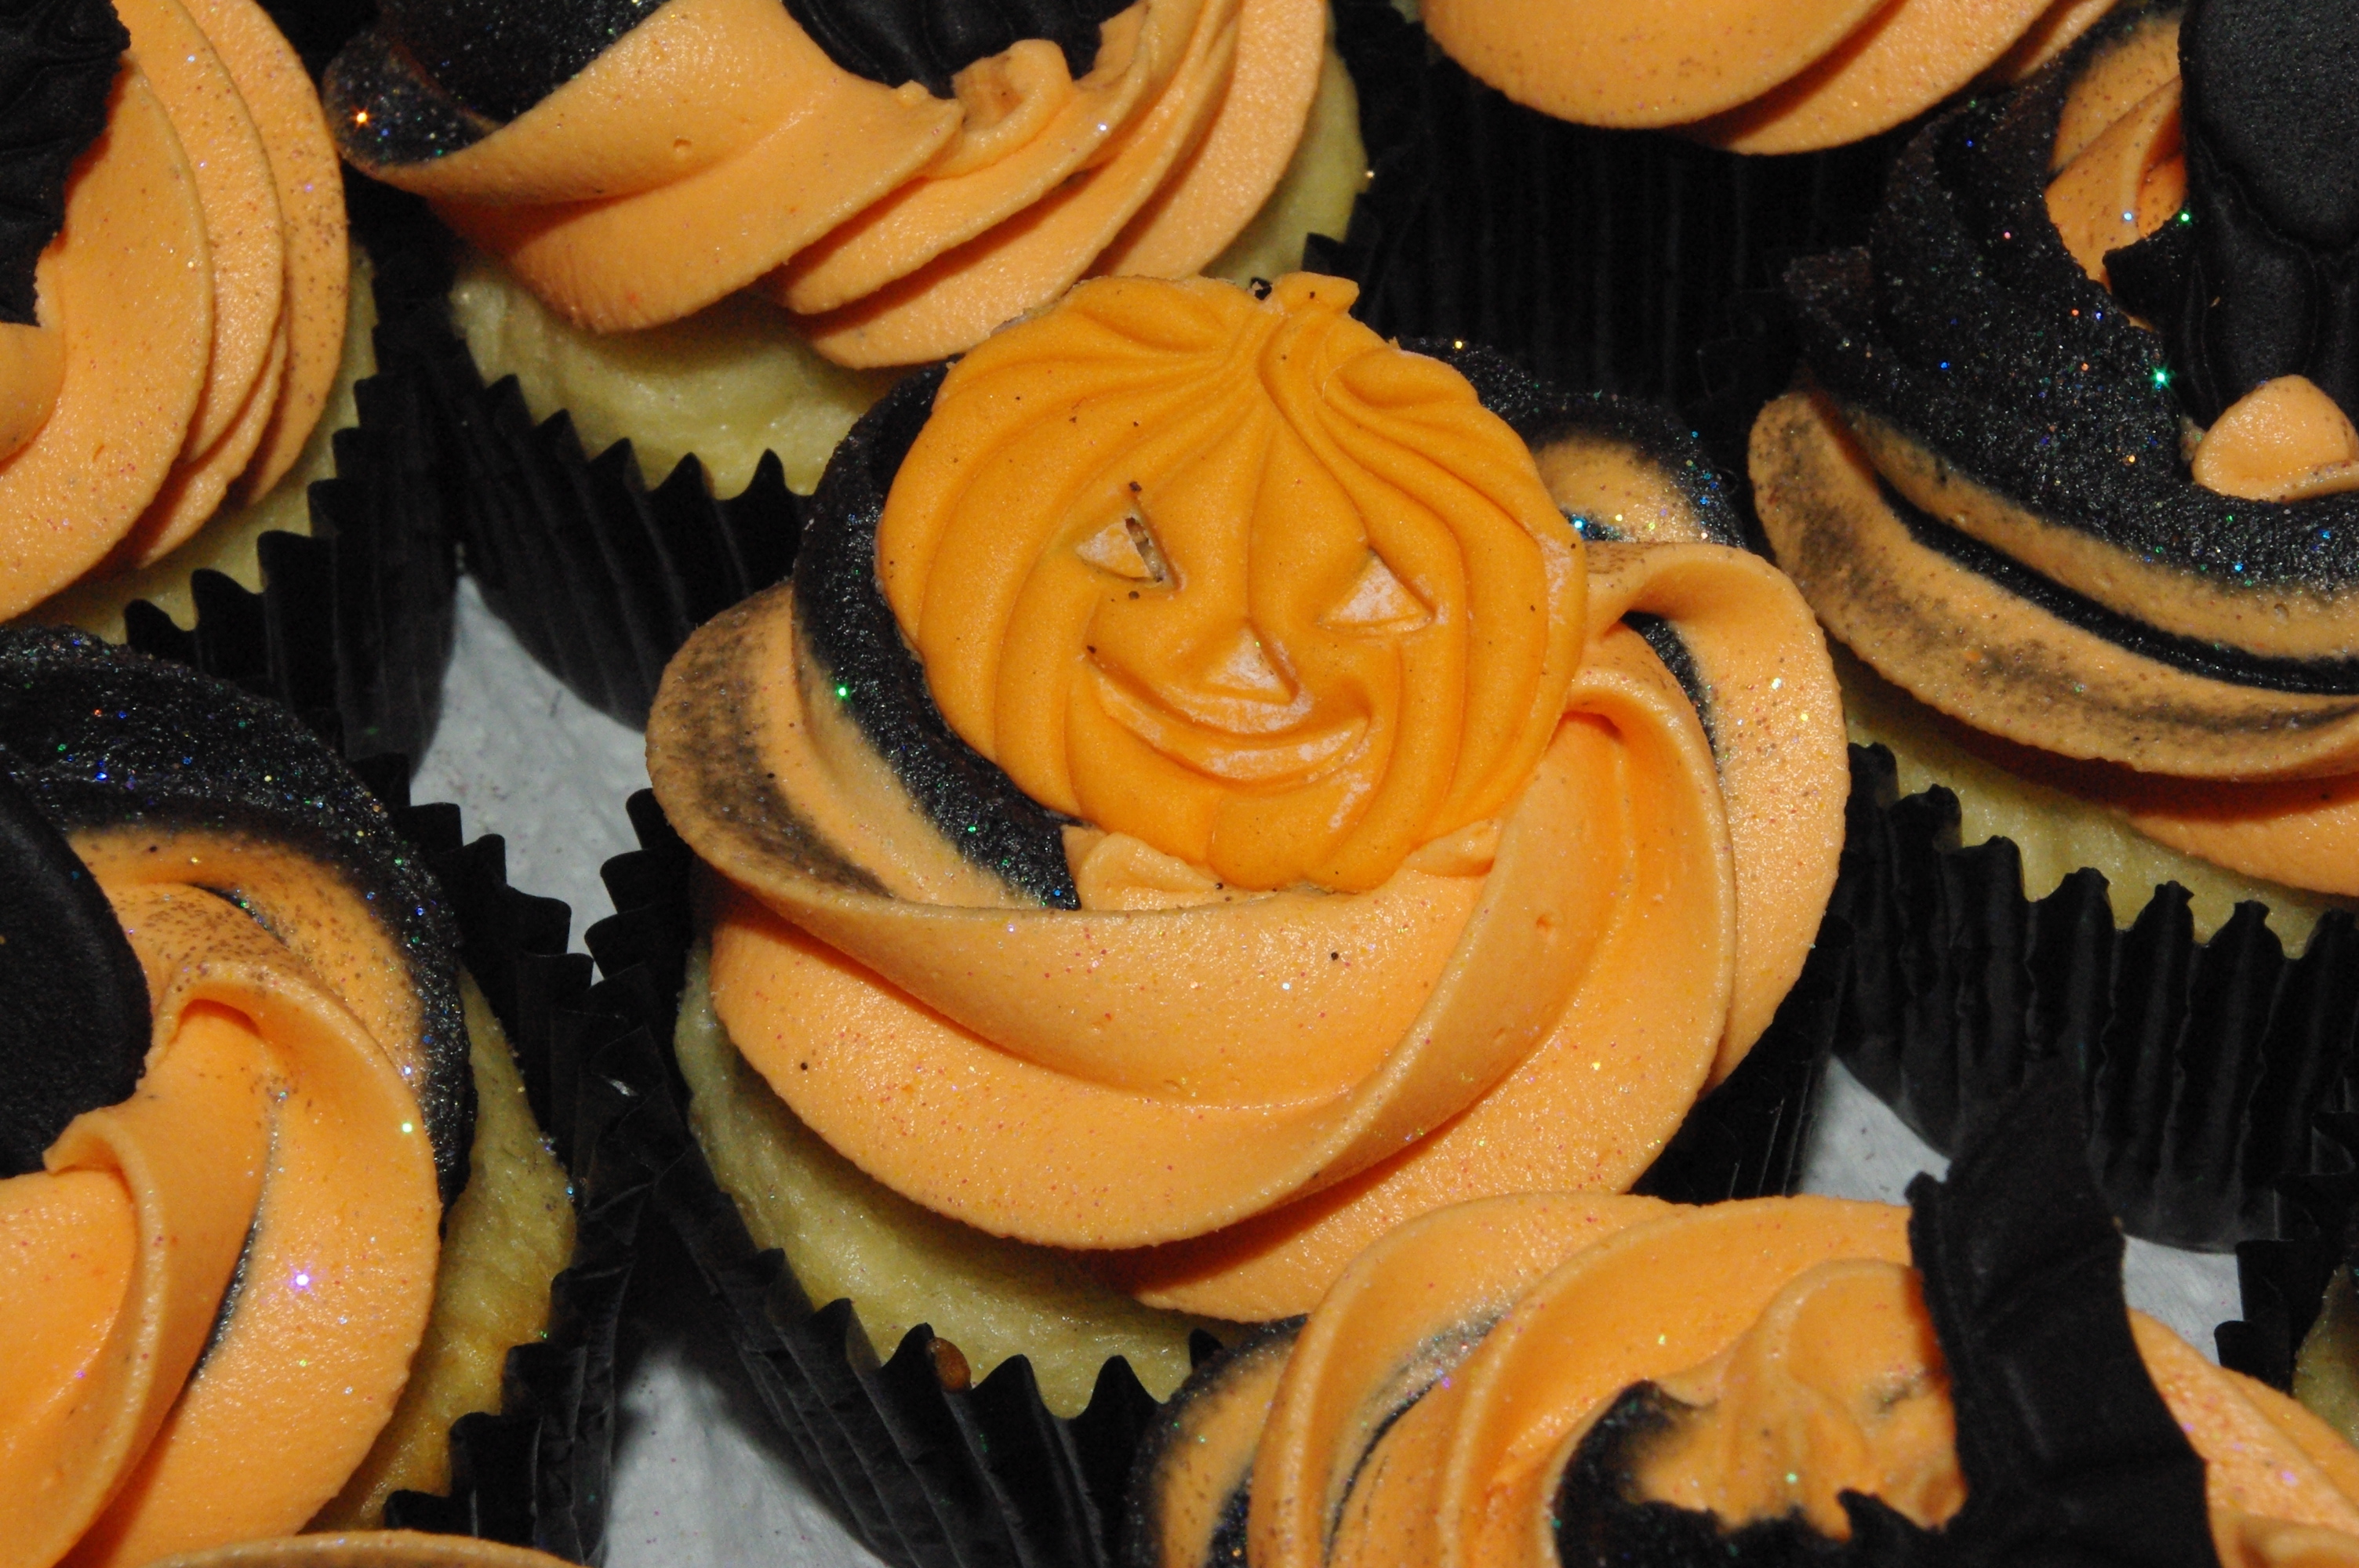 Black and Orange Halloween Cupcakes with Frosting